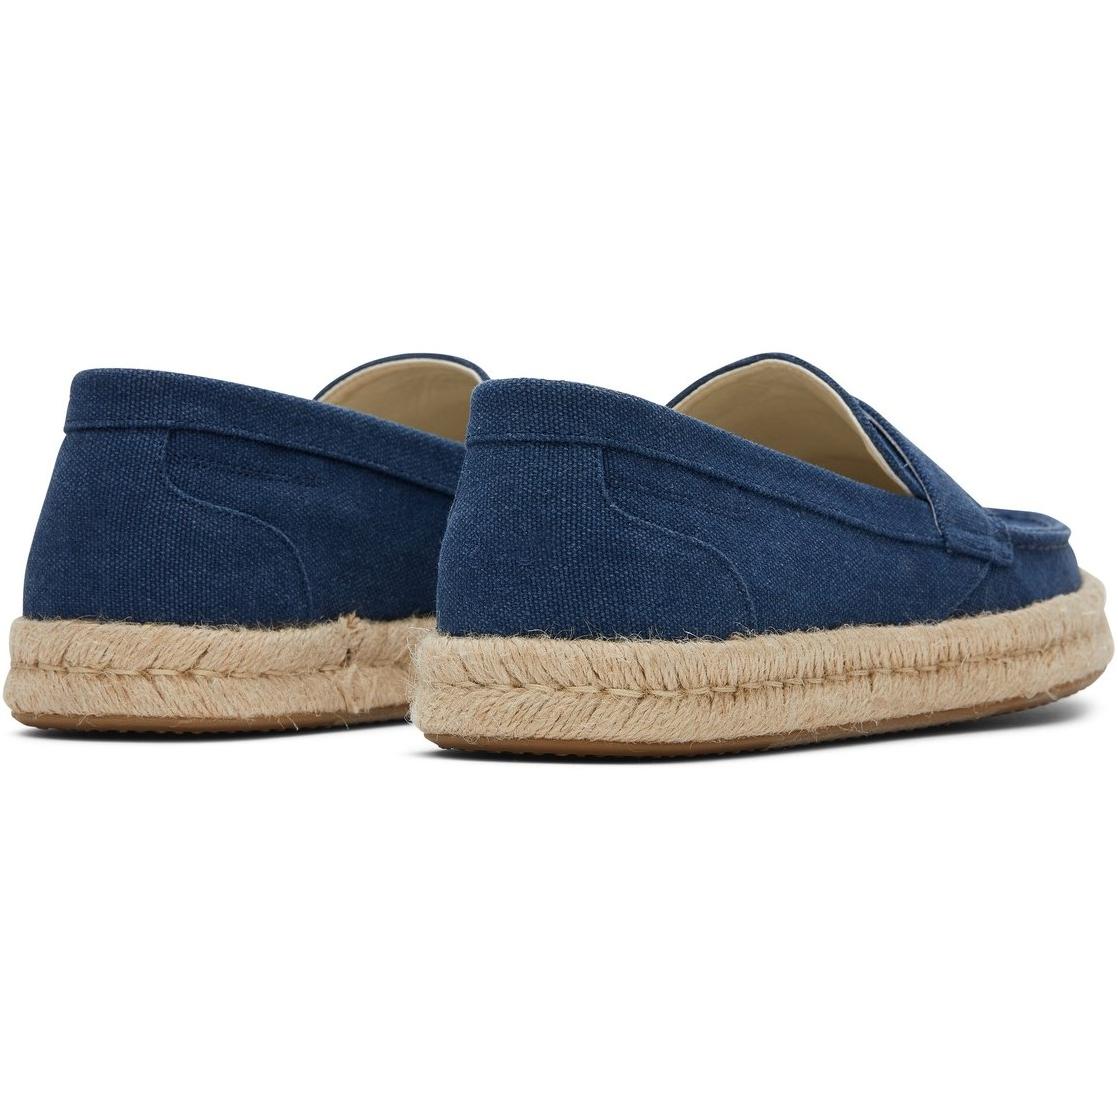 Toms Stanford Rope 2.0 Shoe